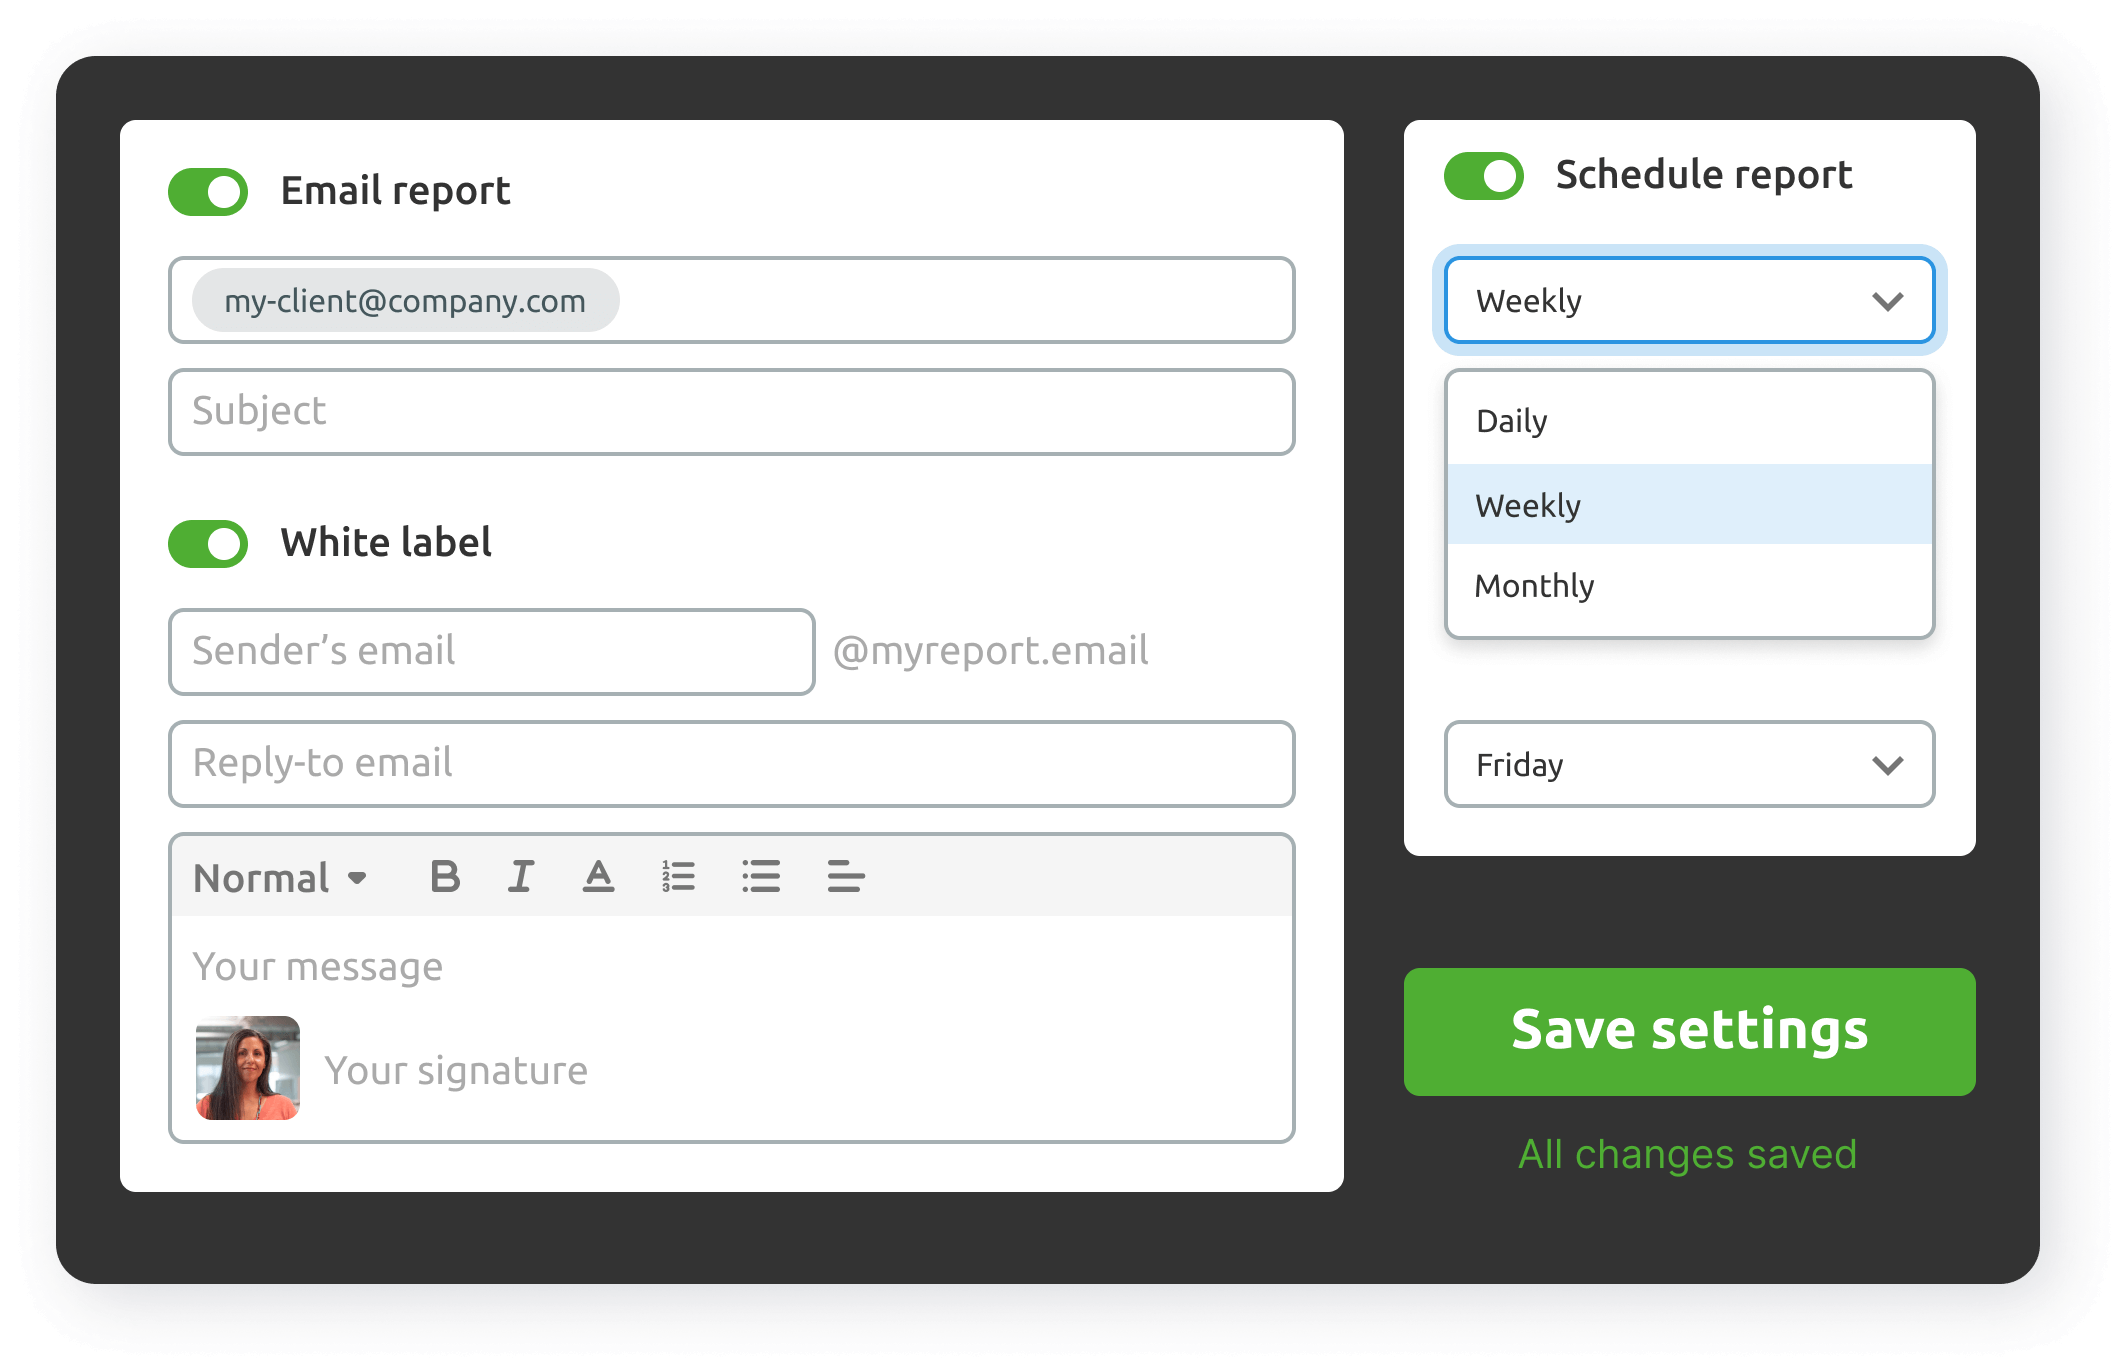 Added custom sender name, Custom reply-to email, Scheduling settings, A custom message with an email signature